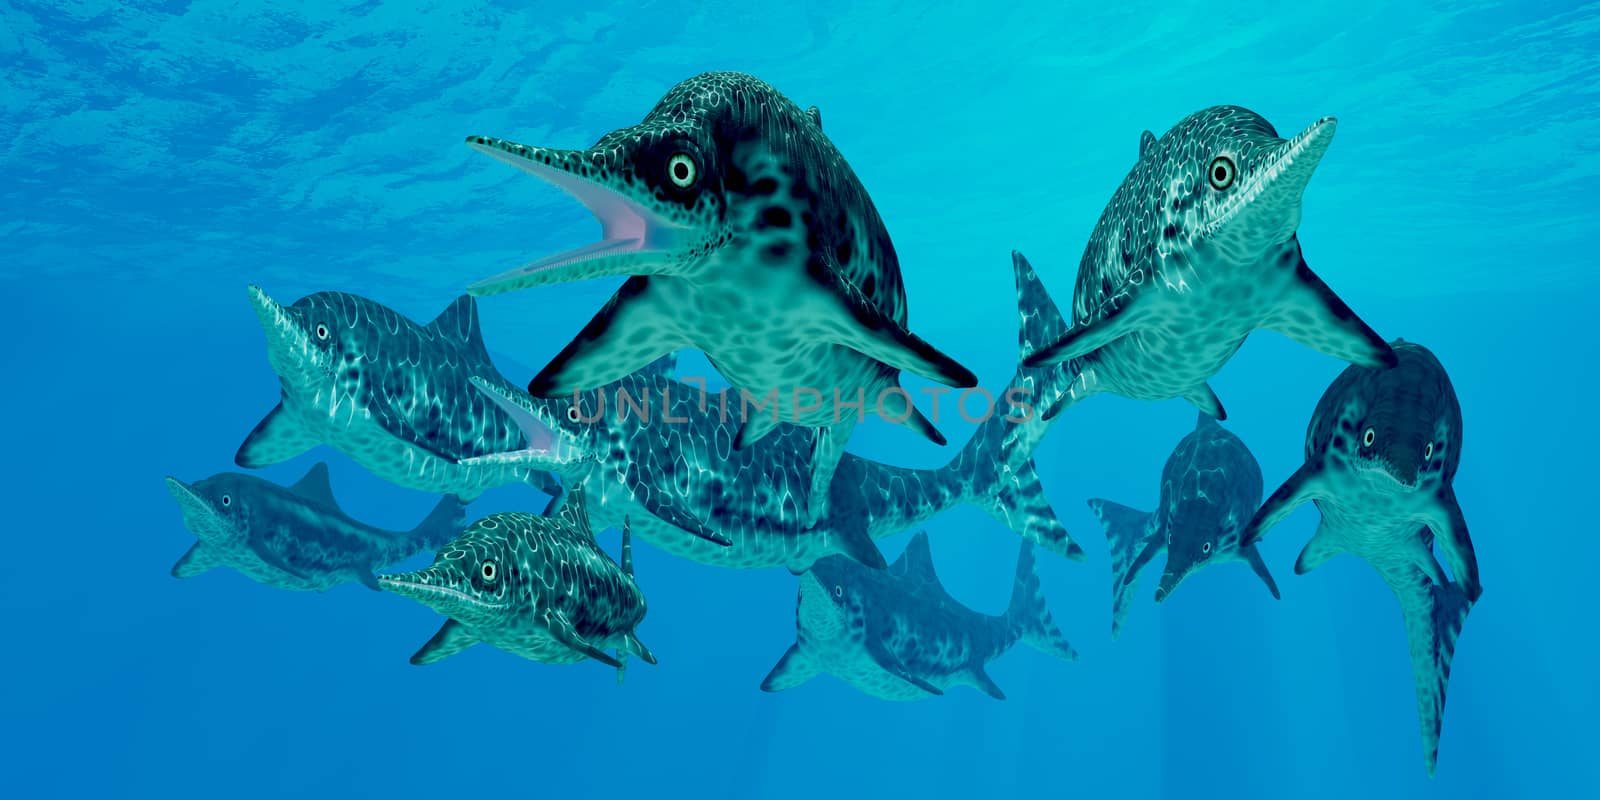 Ichthyosaur was a marine carnivorous reptile that lived in the oceans of Jurassic and Triassic Periods.